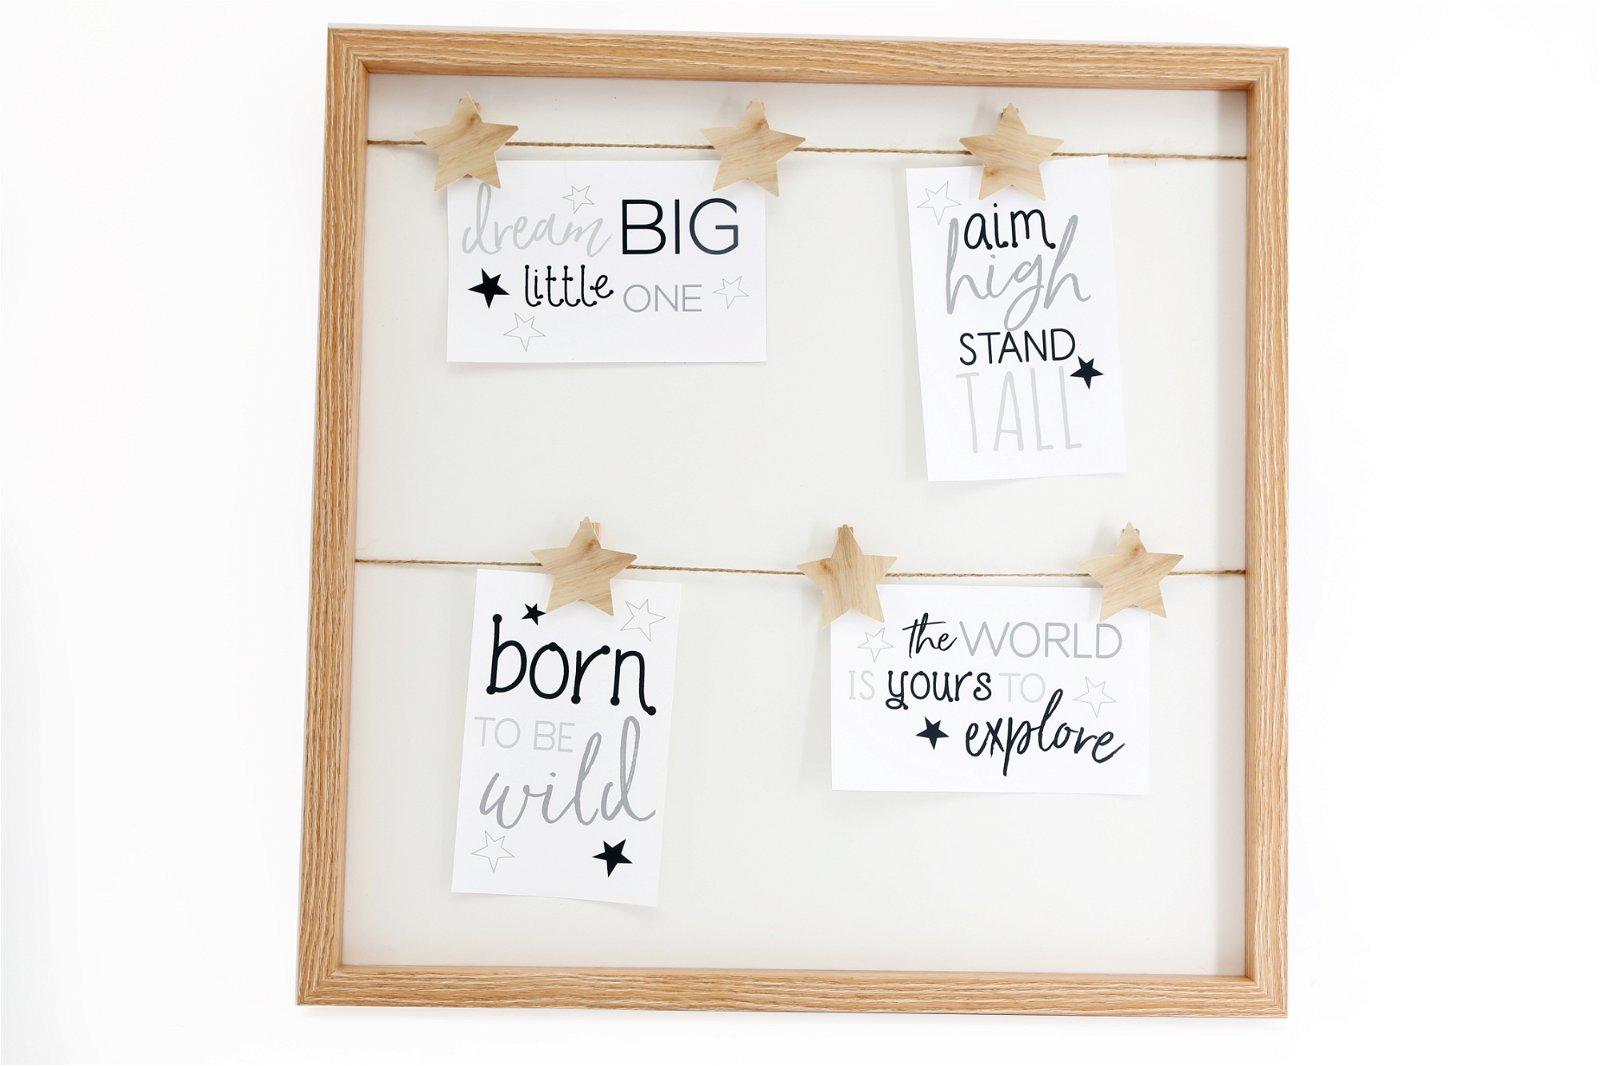 View Square Photo Frame With Star Pegs For Six Photographs information